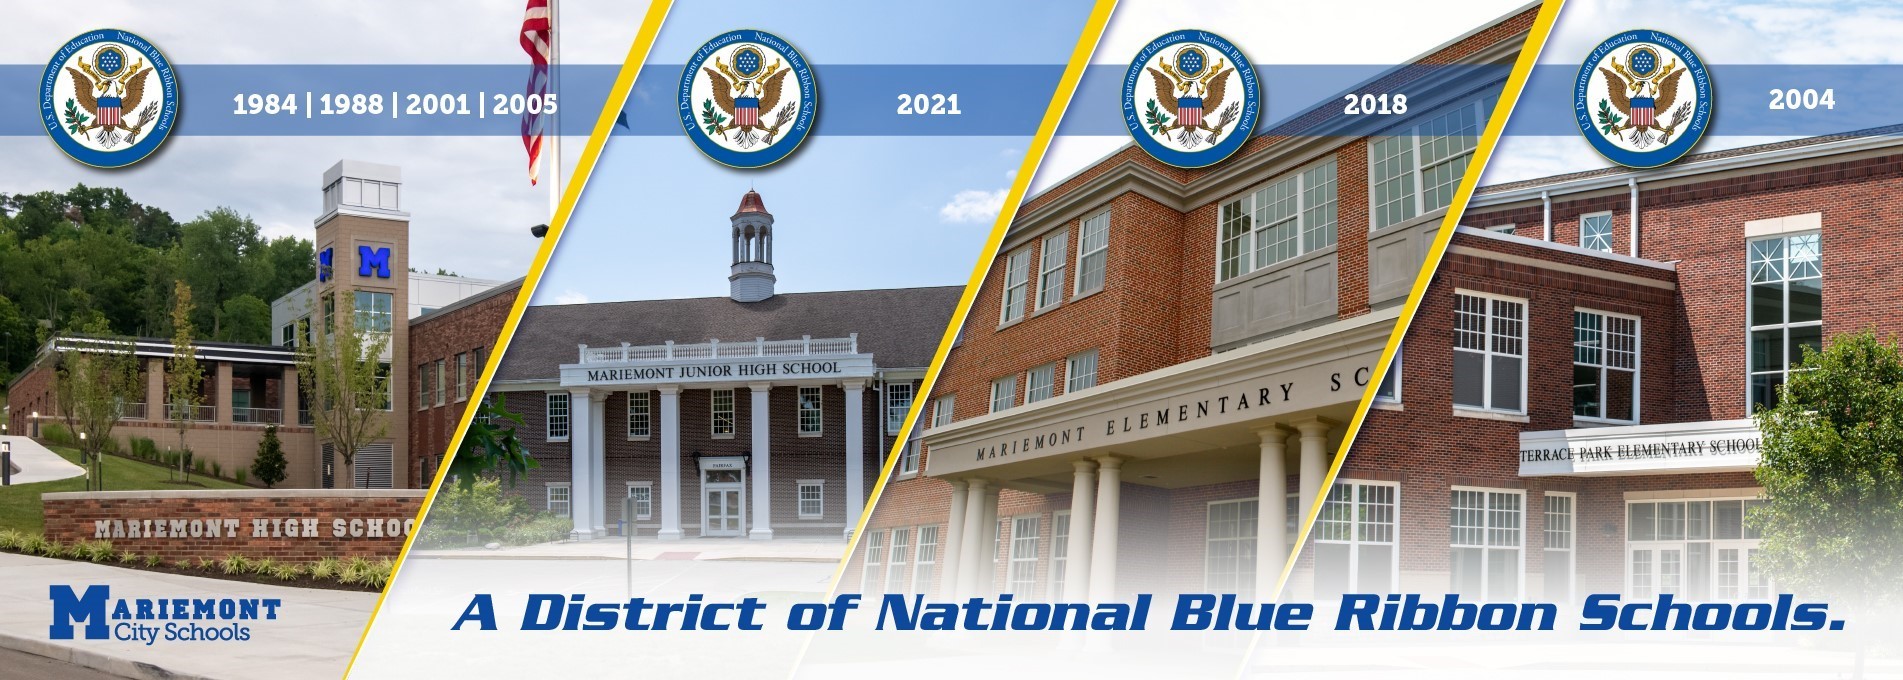 A District of National Blue Ribbon Schools 